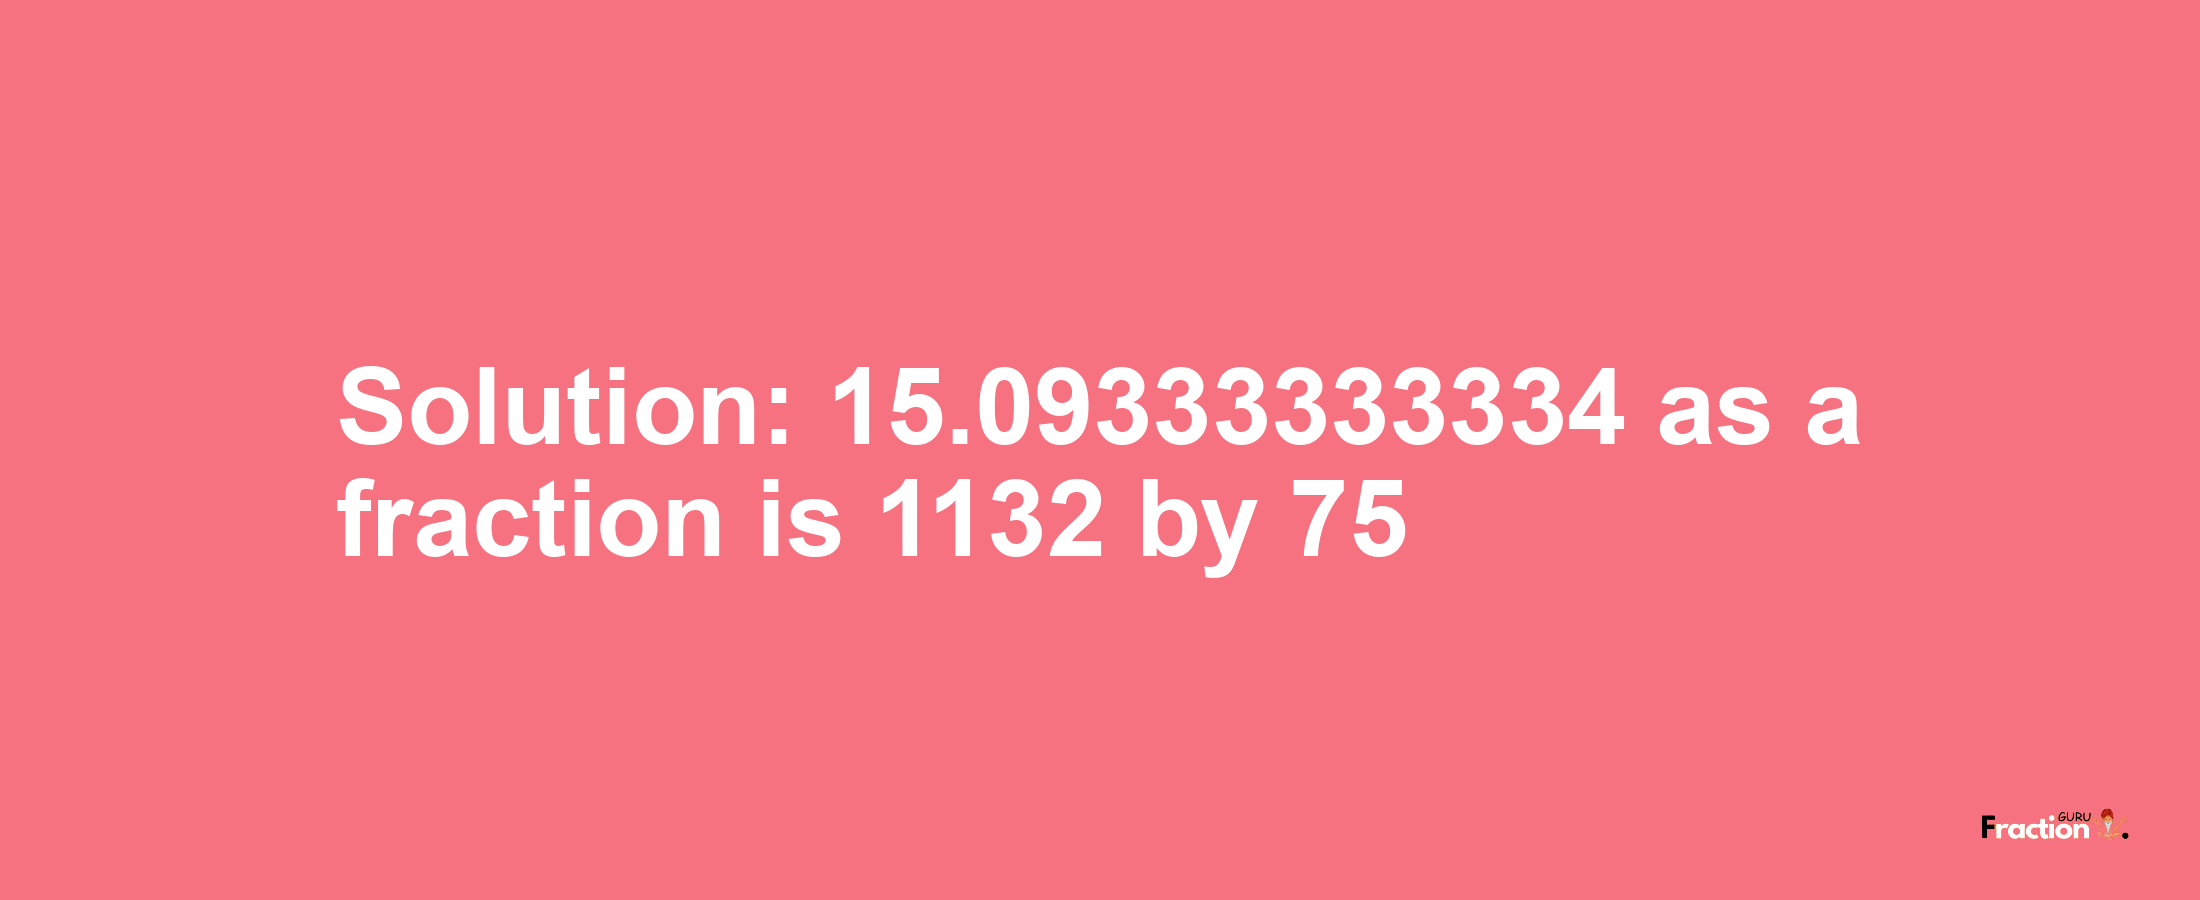 Solution:15.09333333334 as a fraction is 1132/75